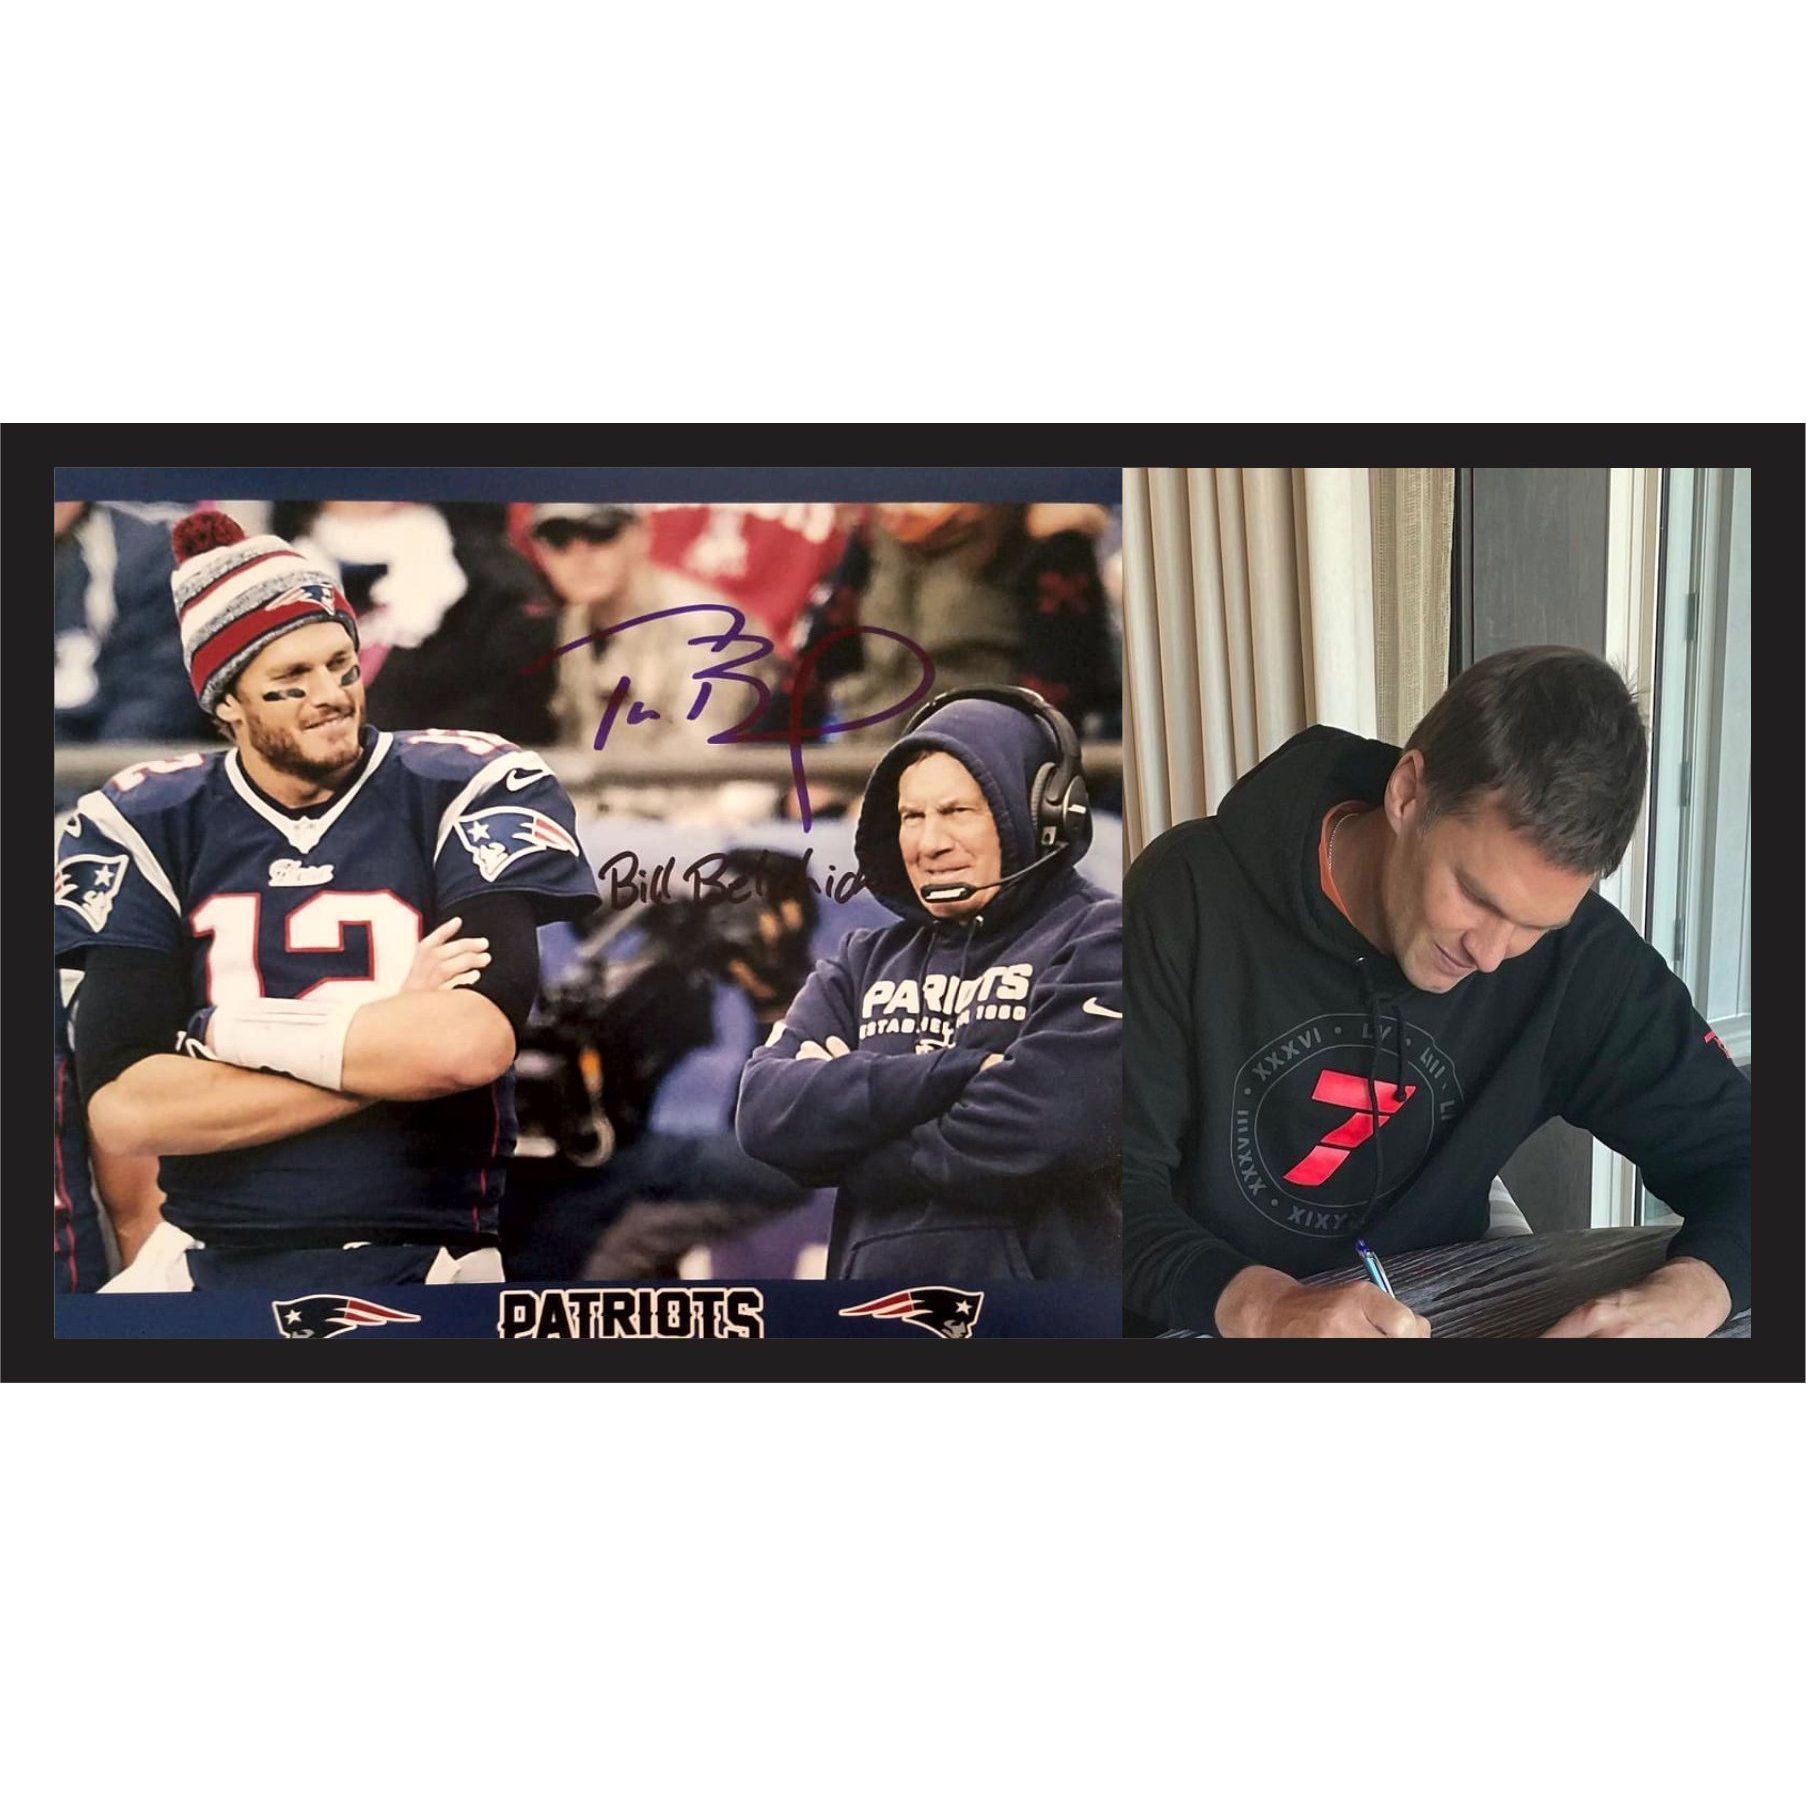 Bill Belichick and Tom Brady 8x10 photo signed with proof